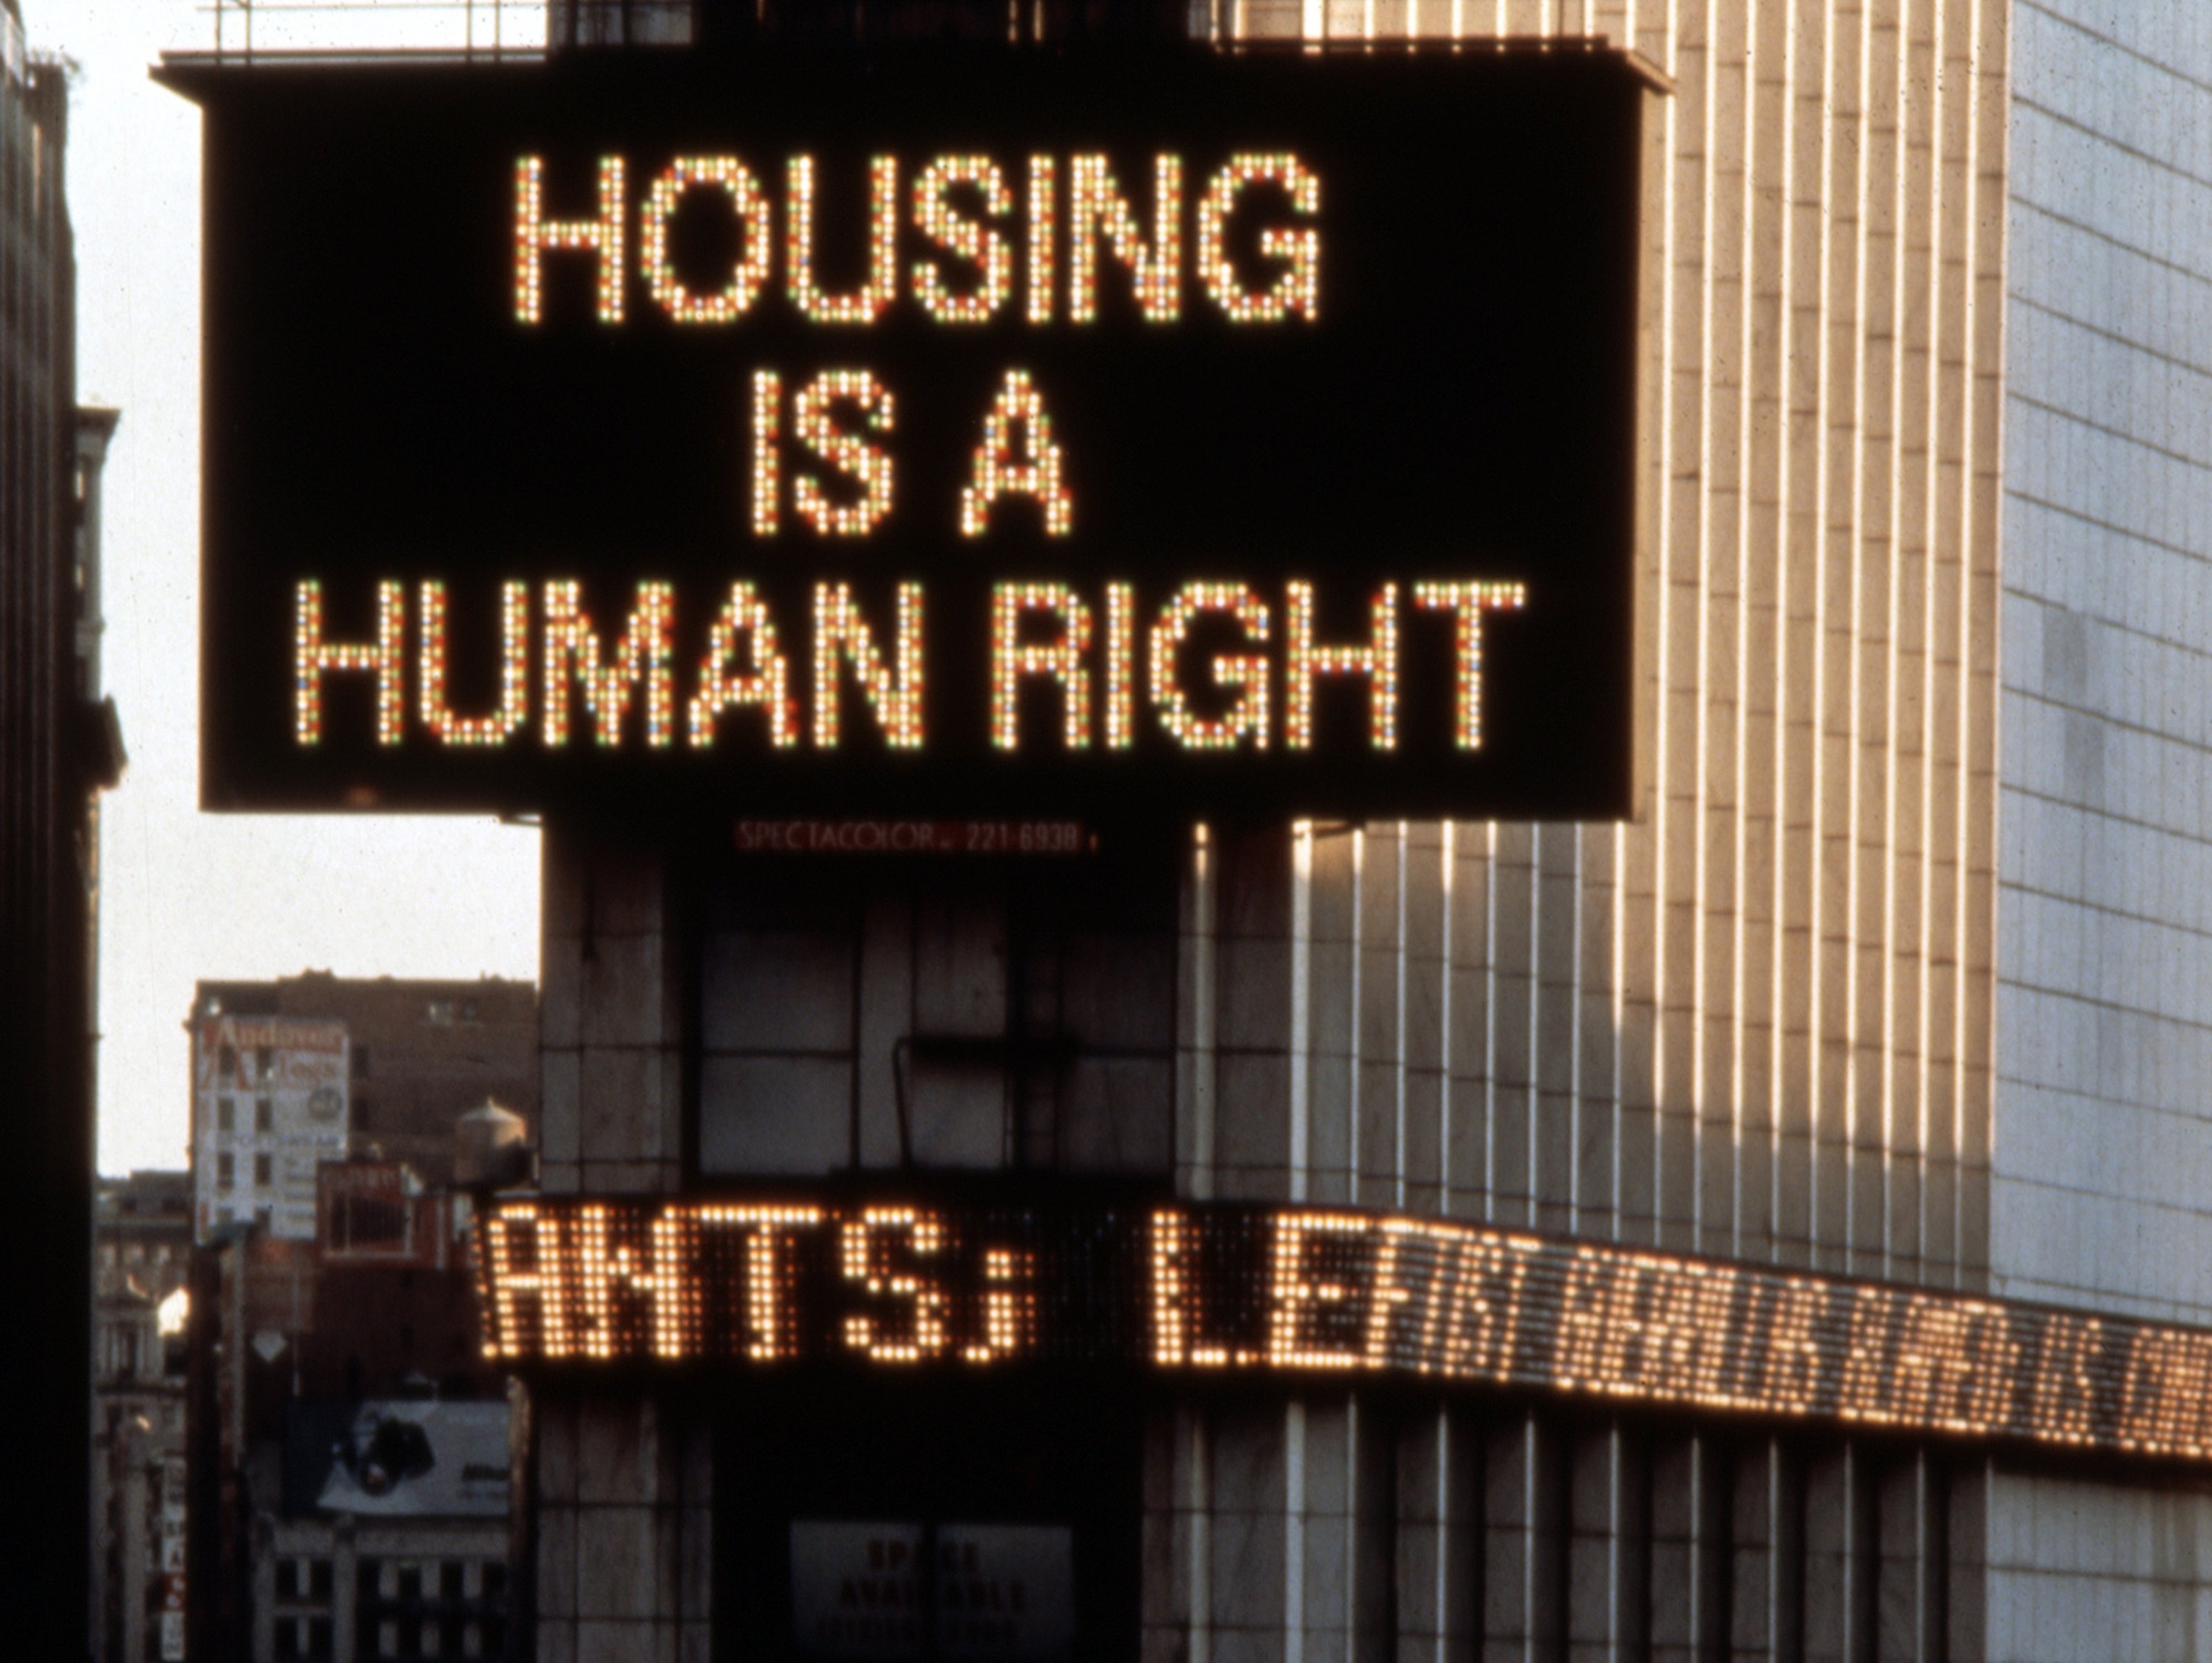 Martha Rosler, Housing Is a Human Right, Time Square Spectacolor animation detail, 1989